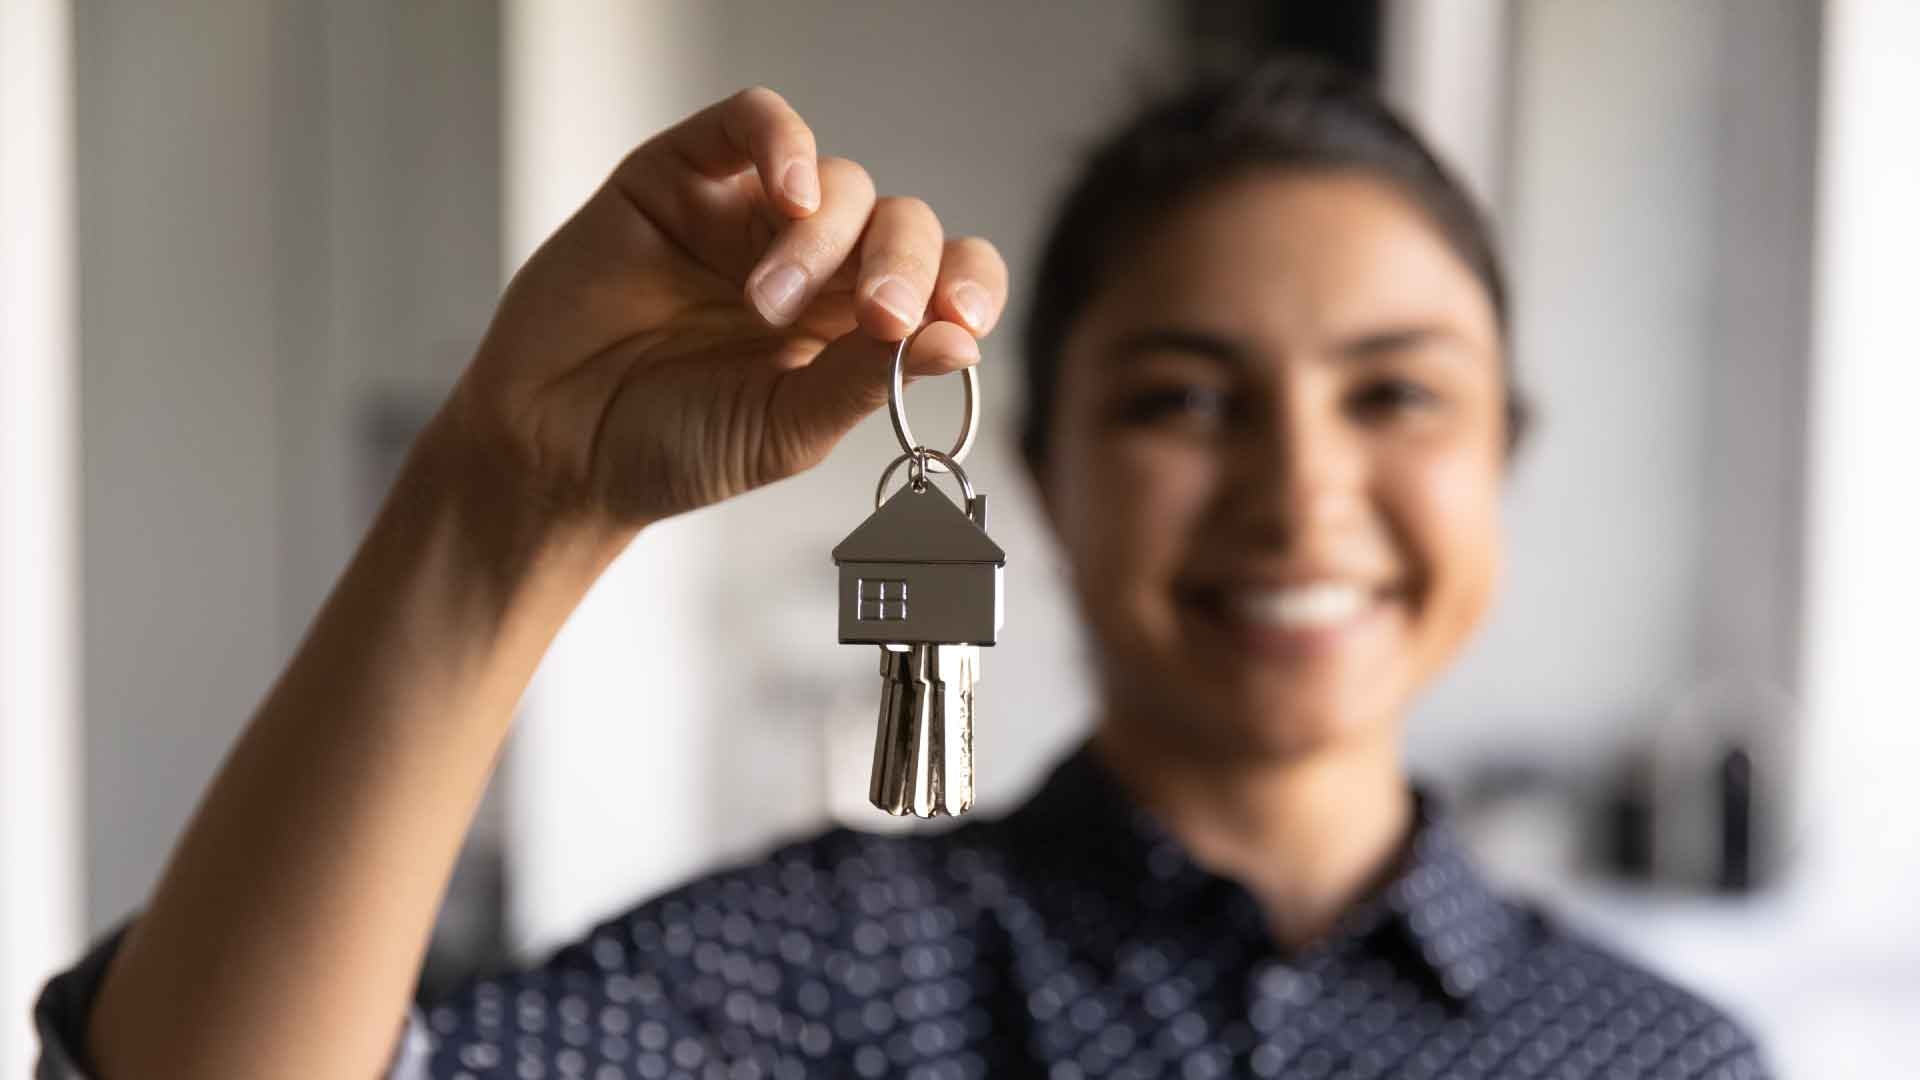 Person holding up house keys and smiling